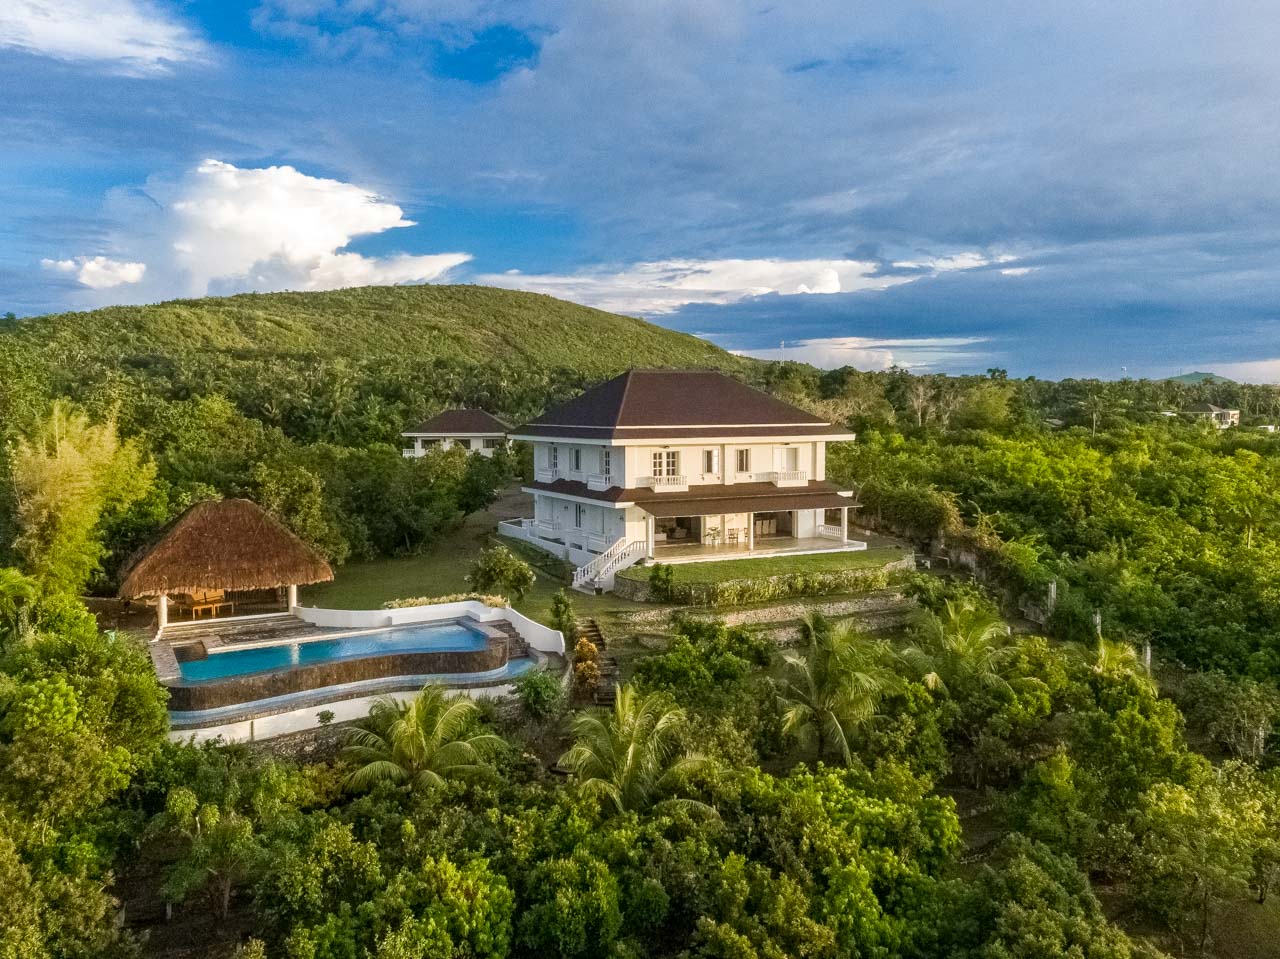 SRBB1 Exquisite Manor by the Sea for Sale in Bohol Island - 1